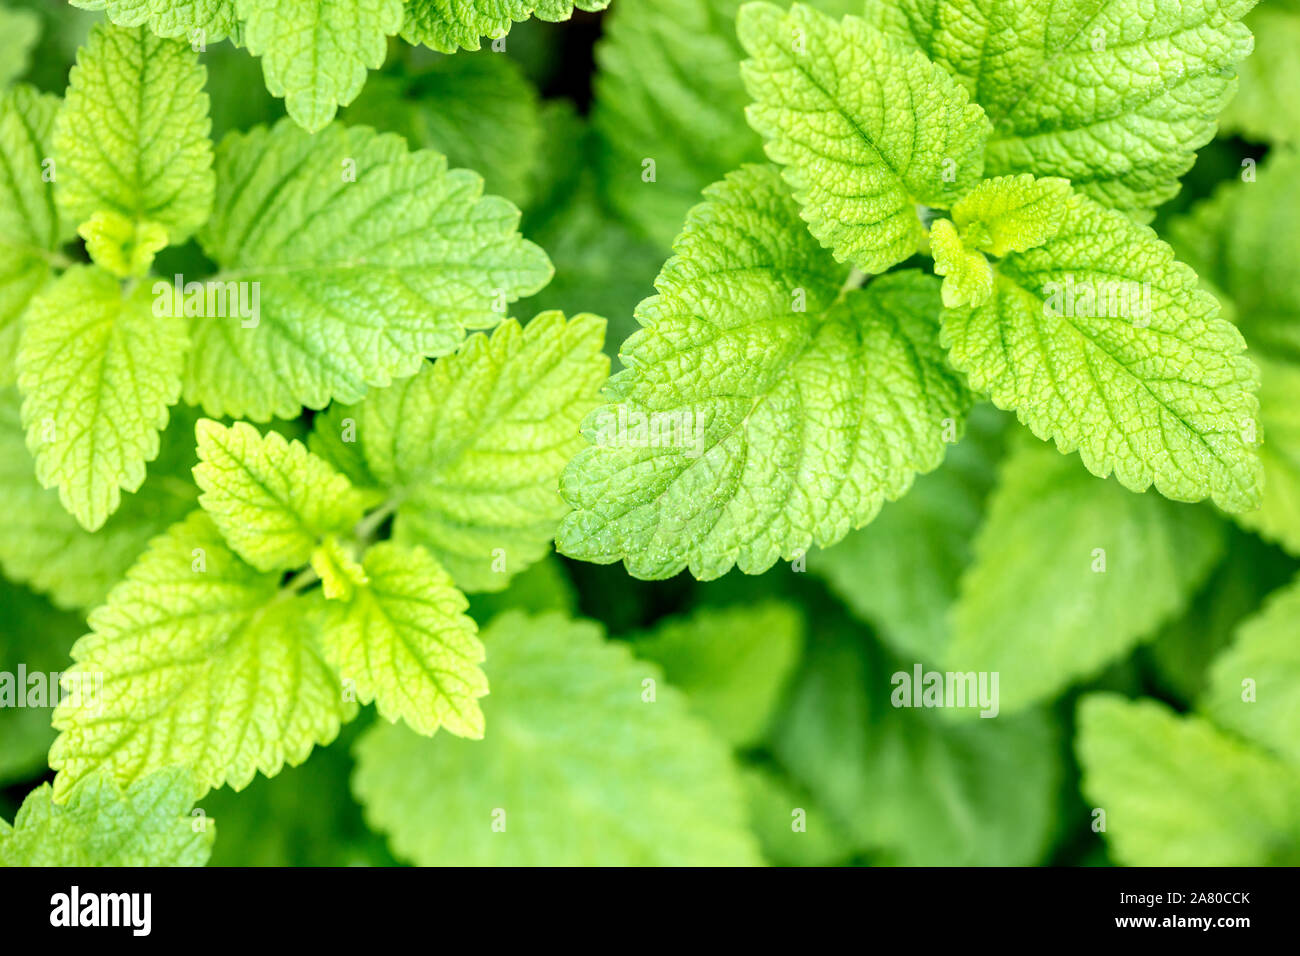 Topview, fresh green and organic balm leaves, Melissa officinalis for homeopathy or natural remedy Stock Photo